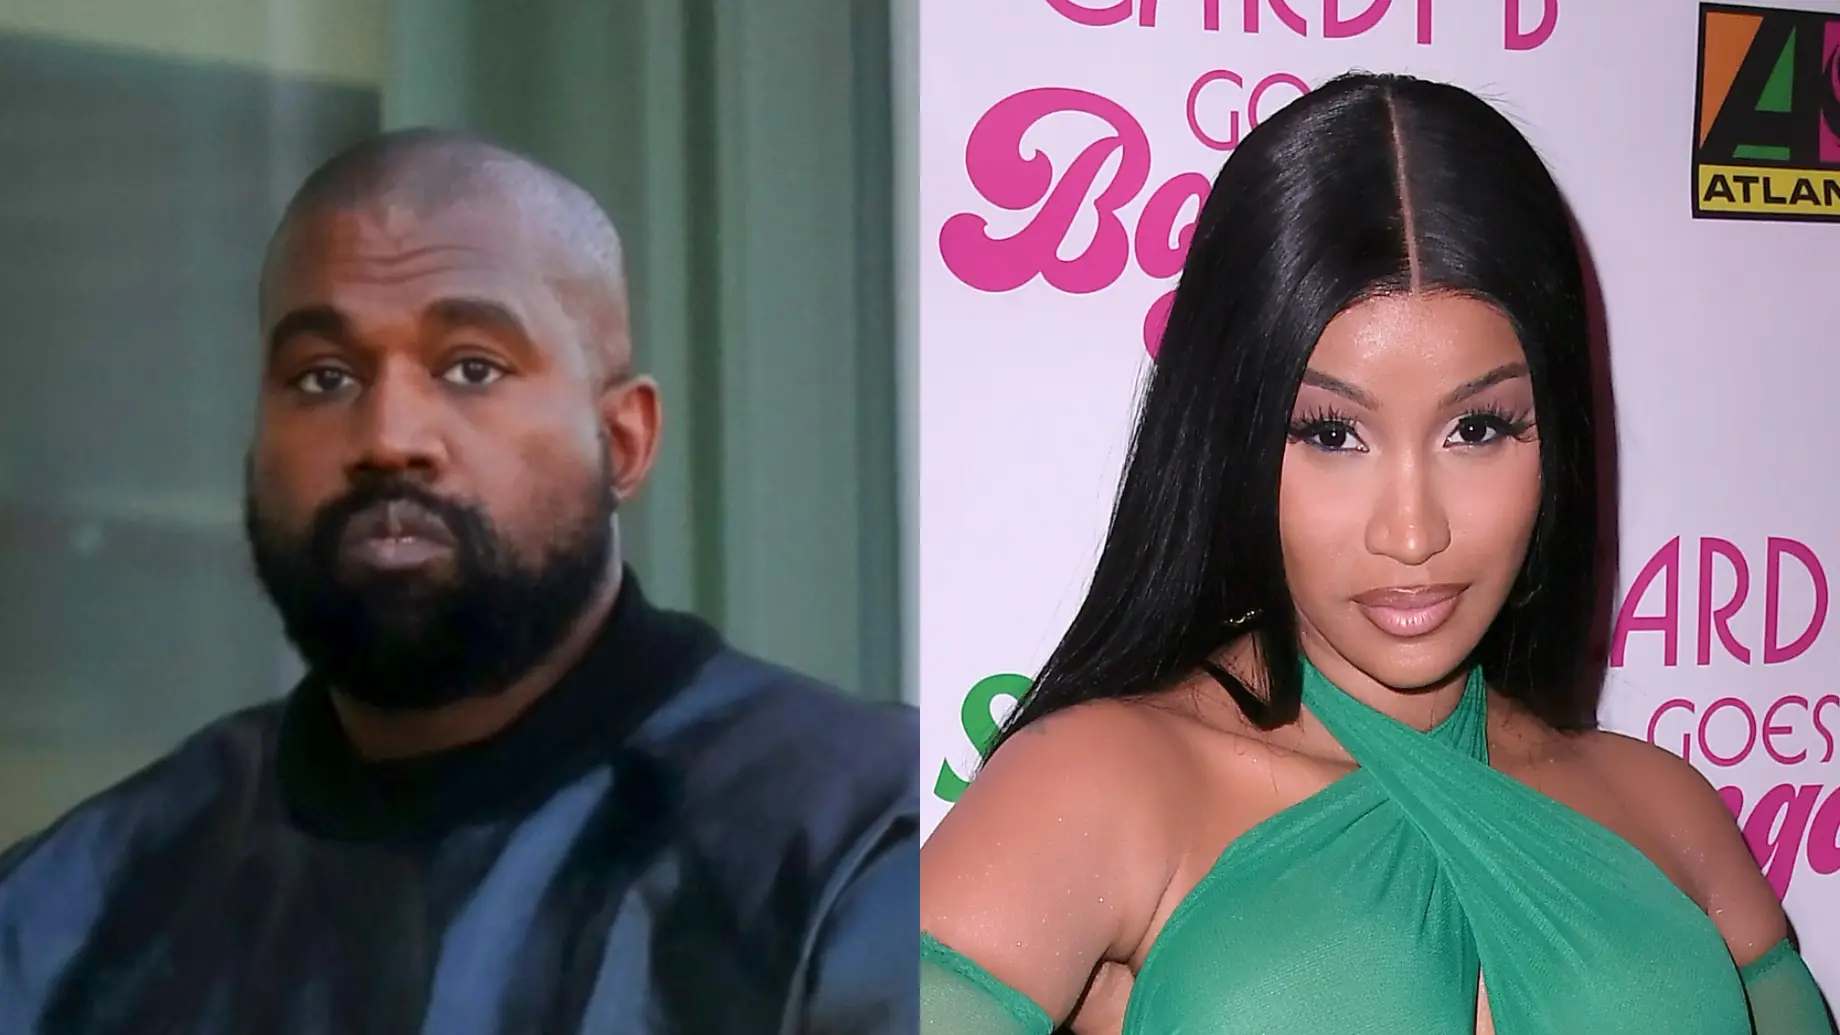 Kanye West Called Cardi B An ‘Illuminati Plant’ In A Leaked Recording, So She Clapped Back With A Clip Of Her Own [Video]